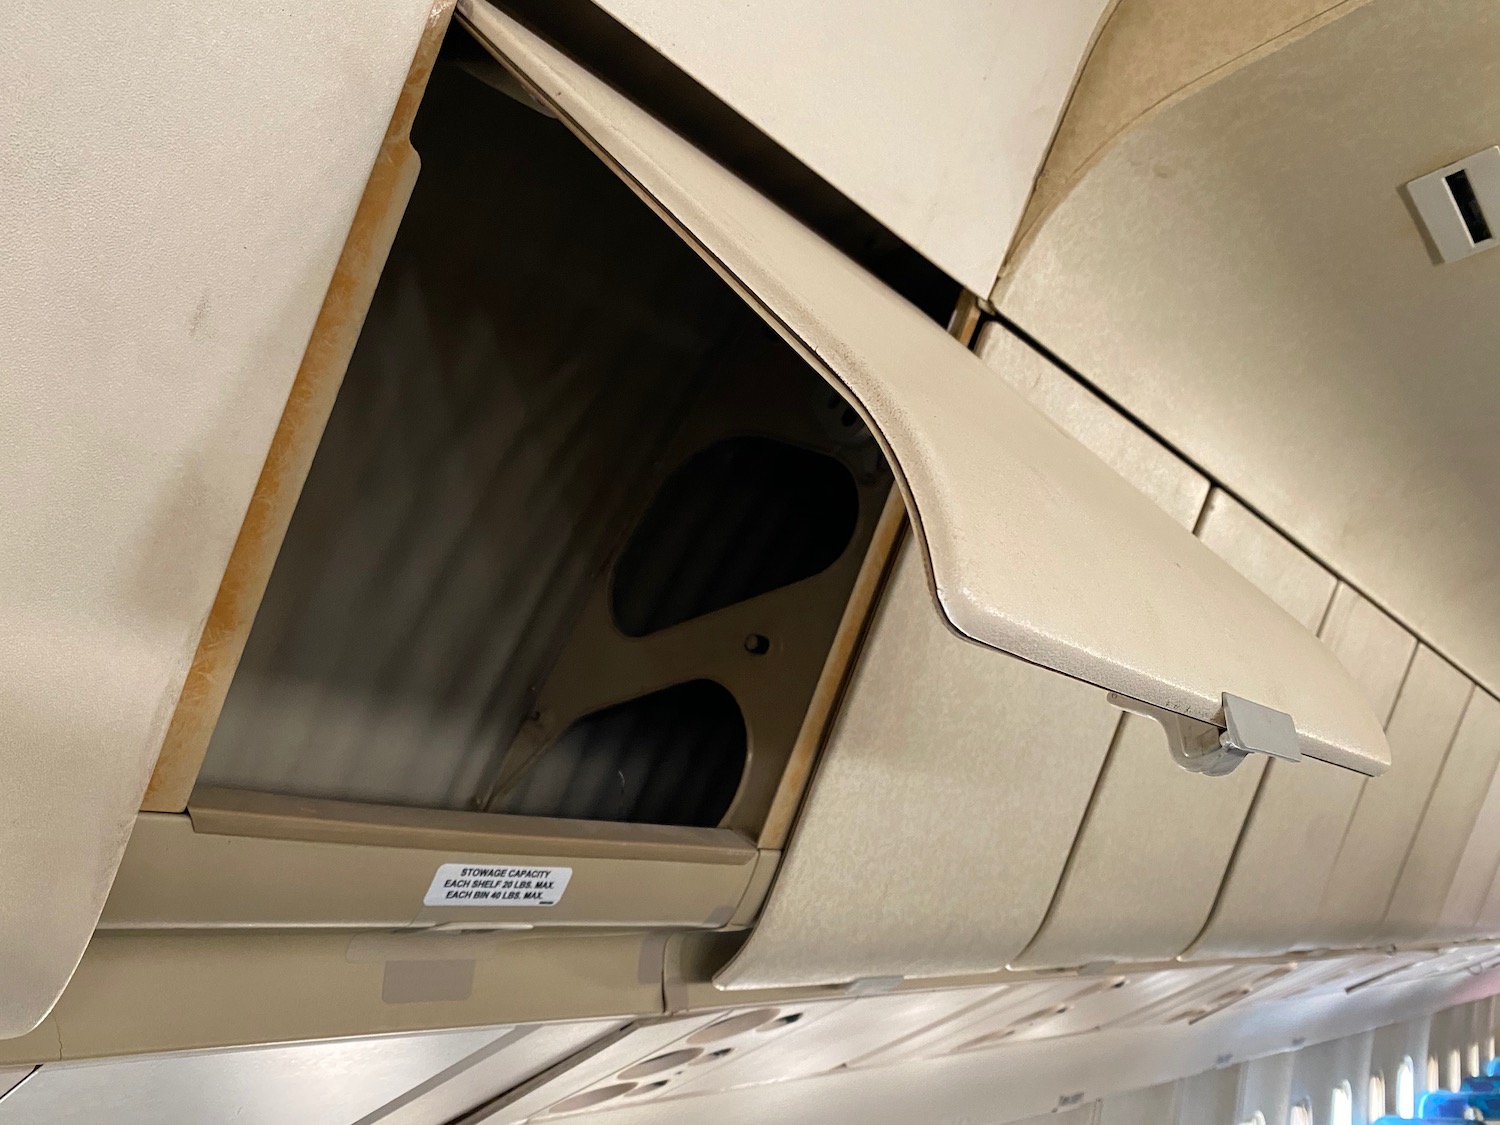 an open air vent on a plane